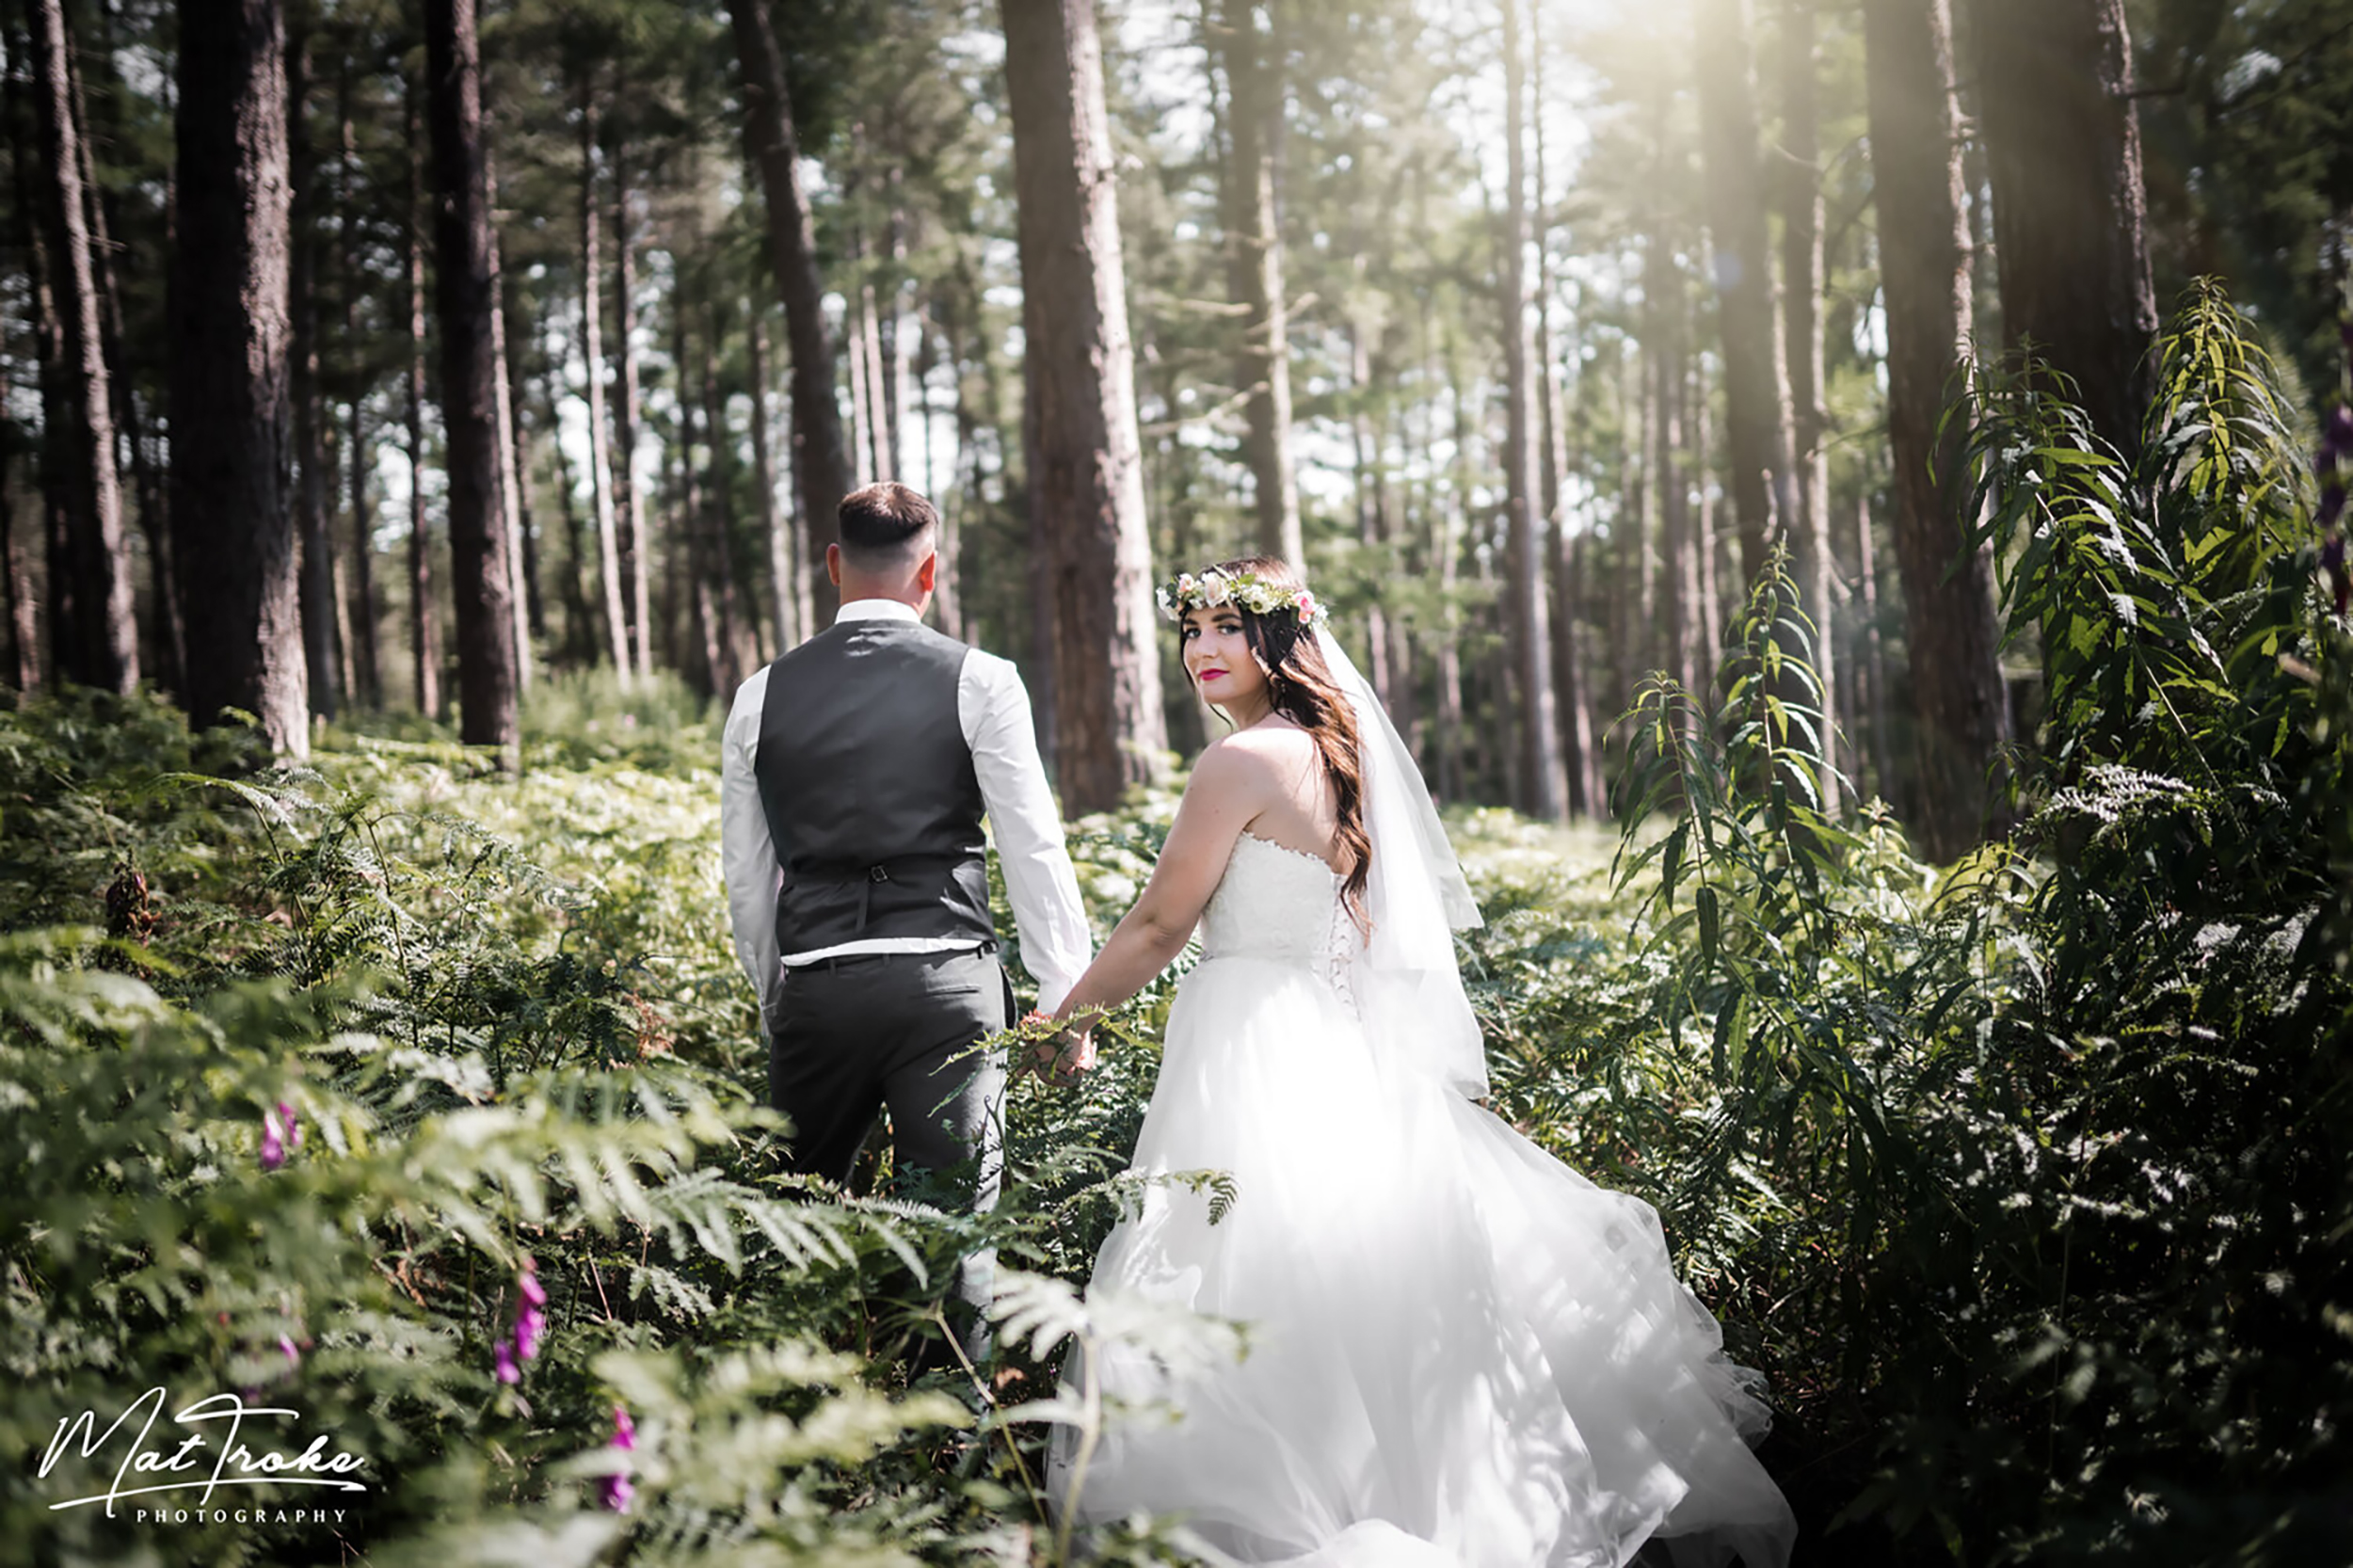 A bride and groom in a forest surrounded by bracken.